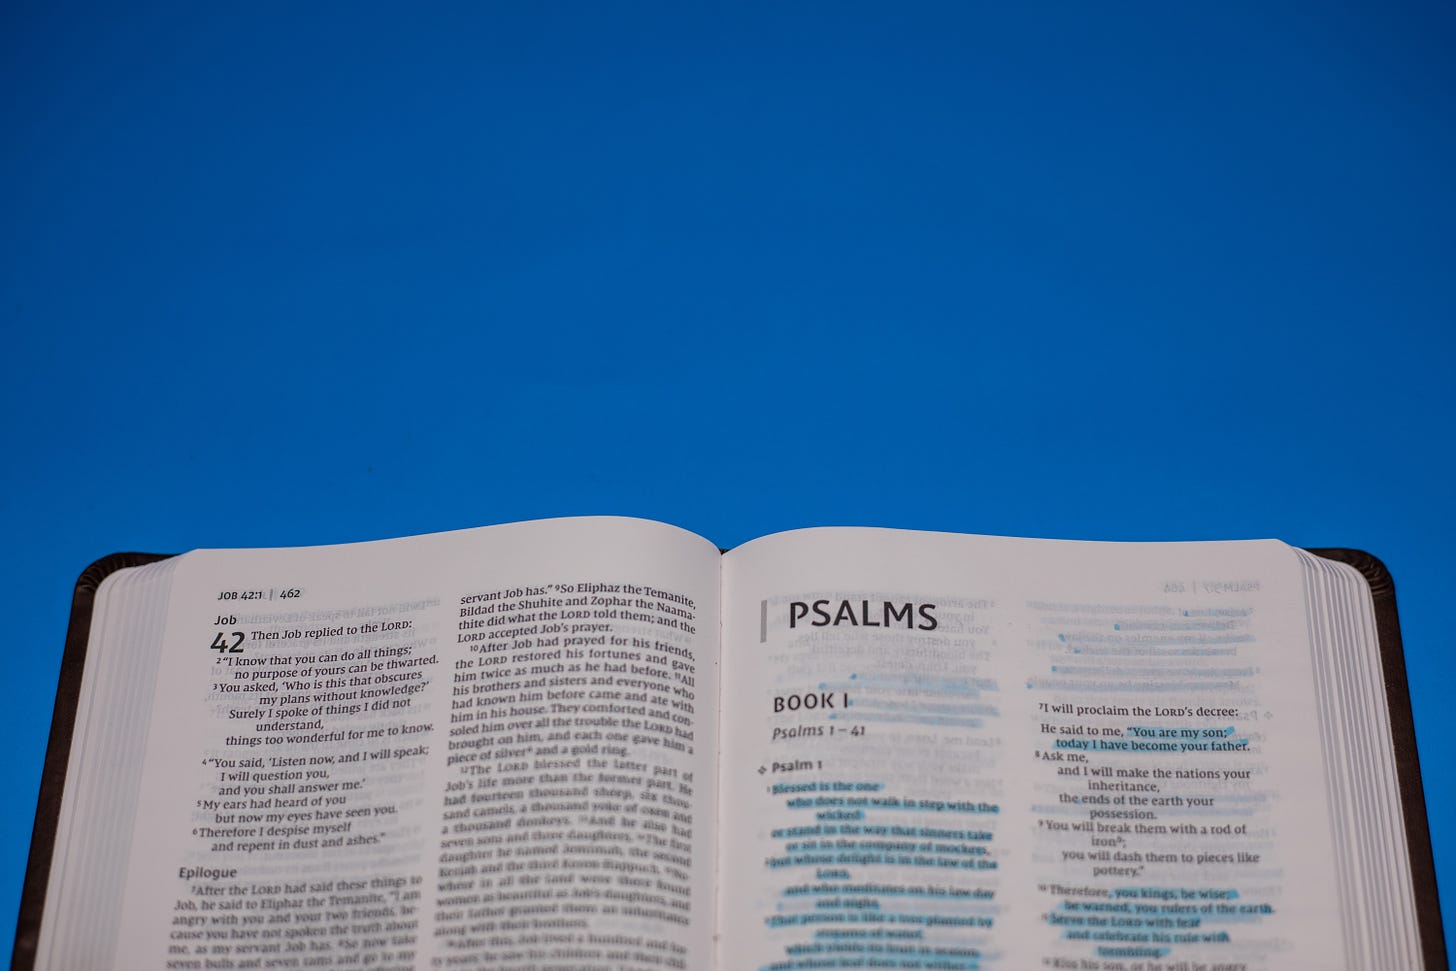 The Bible opened to Psalm 1 against a blue background. 